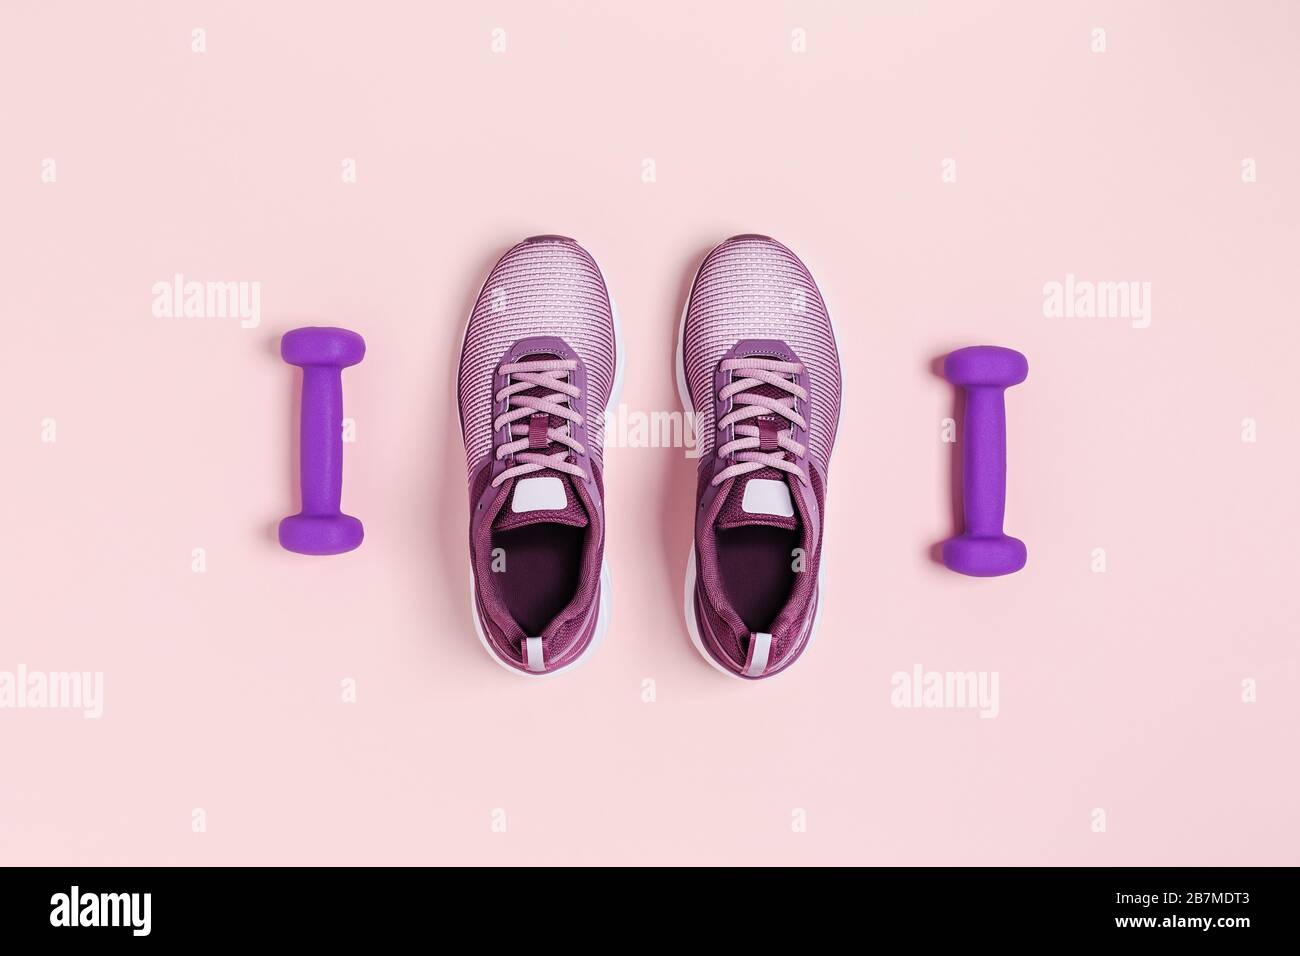 Female Sport Equipment On A Pink Background Stock Photo - Download